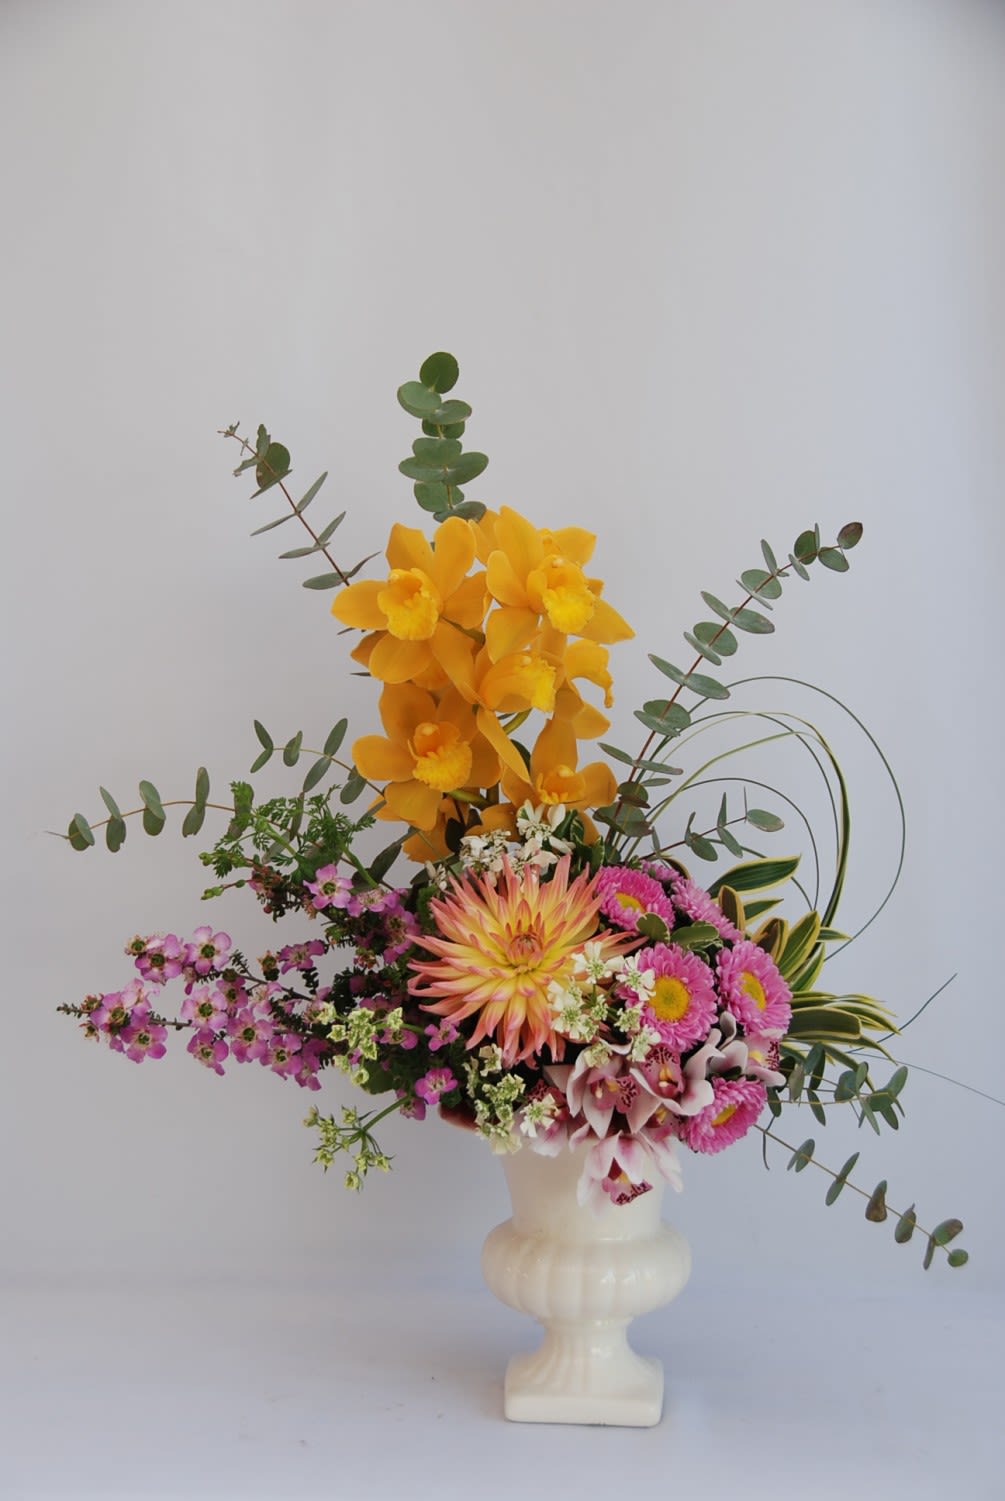 This beautiful yellow cymbidium orchid arrangement is designed to brighten the mood